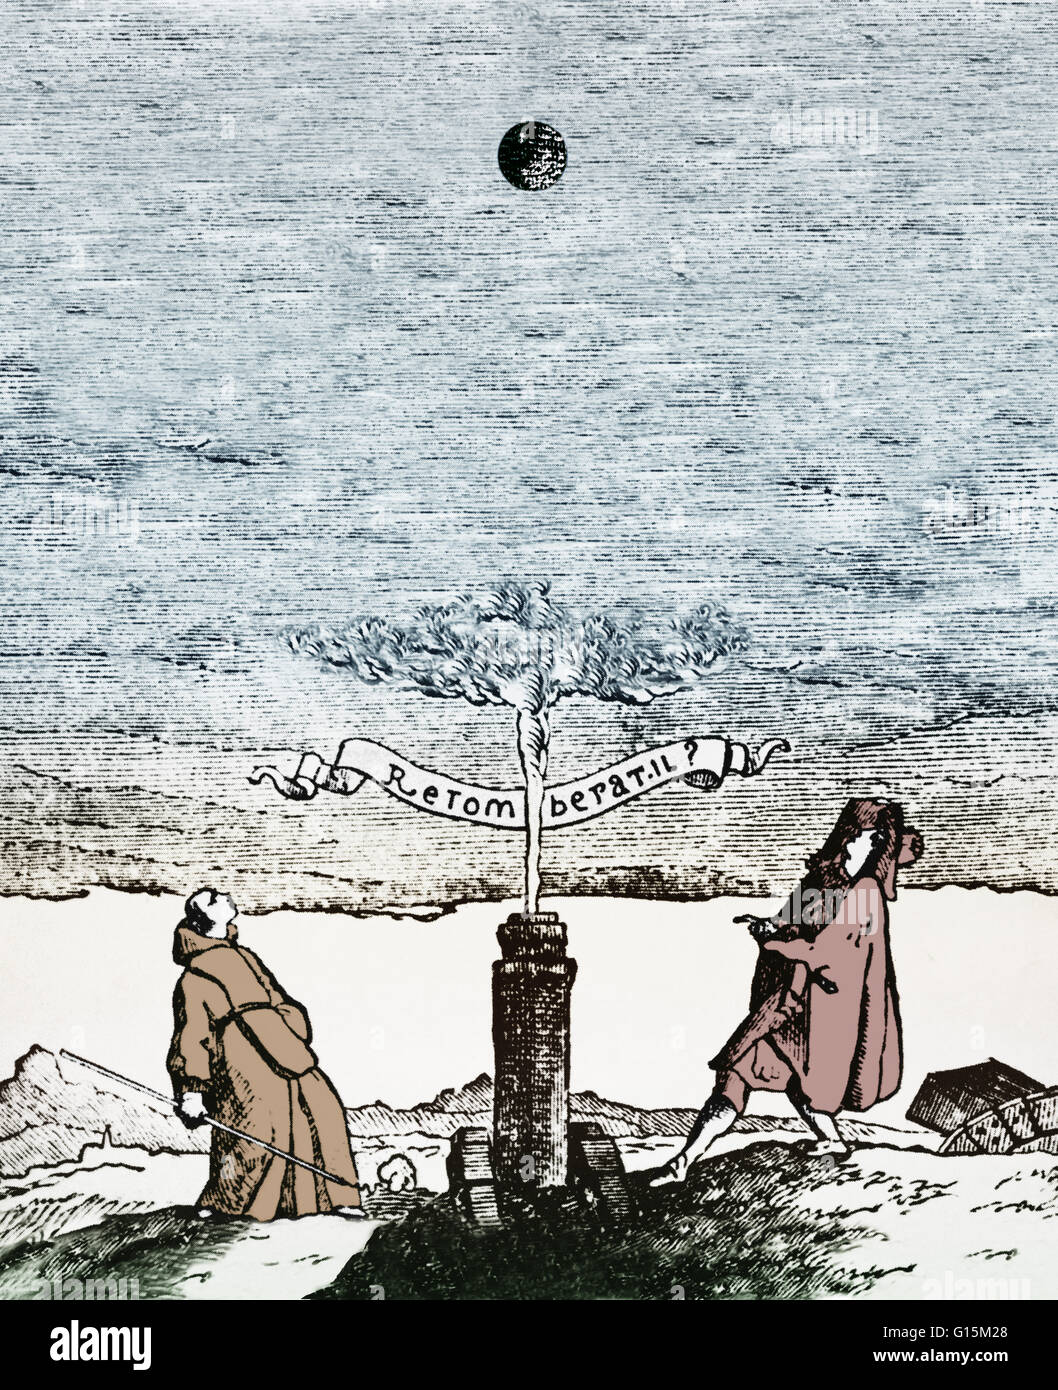 'Will the cannon ball come back down again?' This old woodcut, taken from the correspondence of Rene Descartes, illustrates an experiment proposed by Father Mersenne, contemporary and friend of Galileo, to test the behavior of falling bodies. The French c Stock Photo